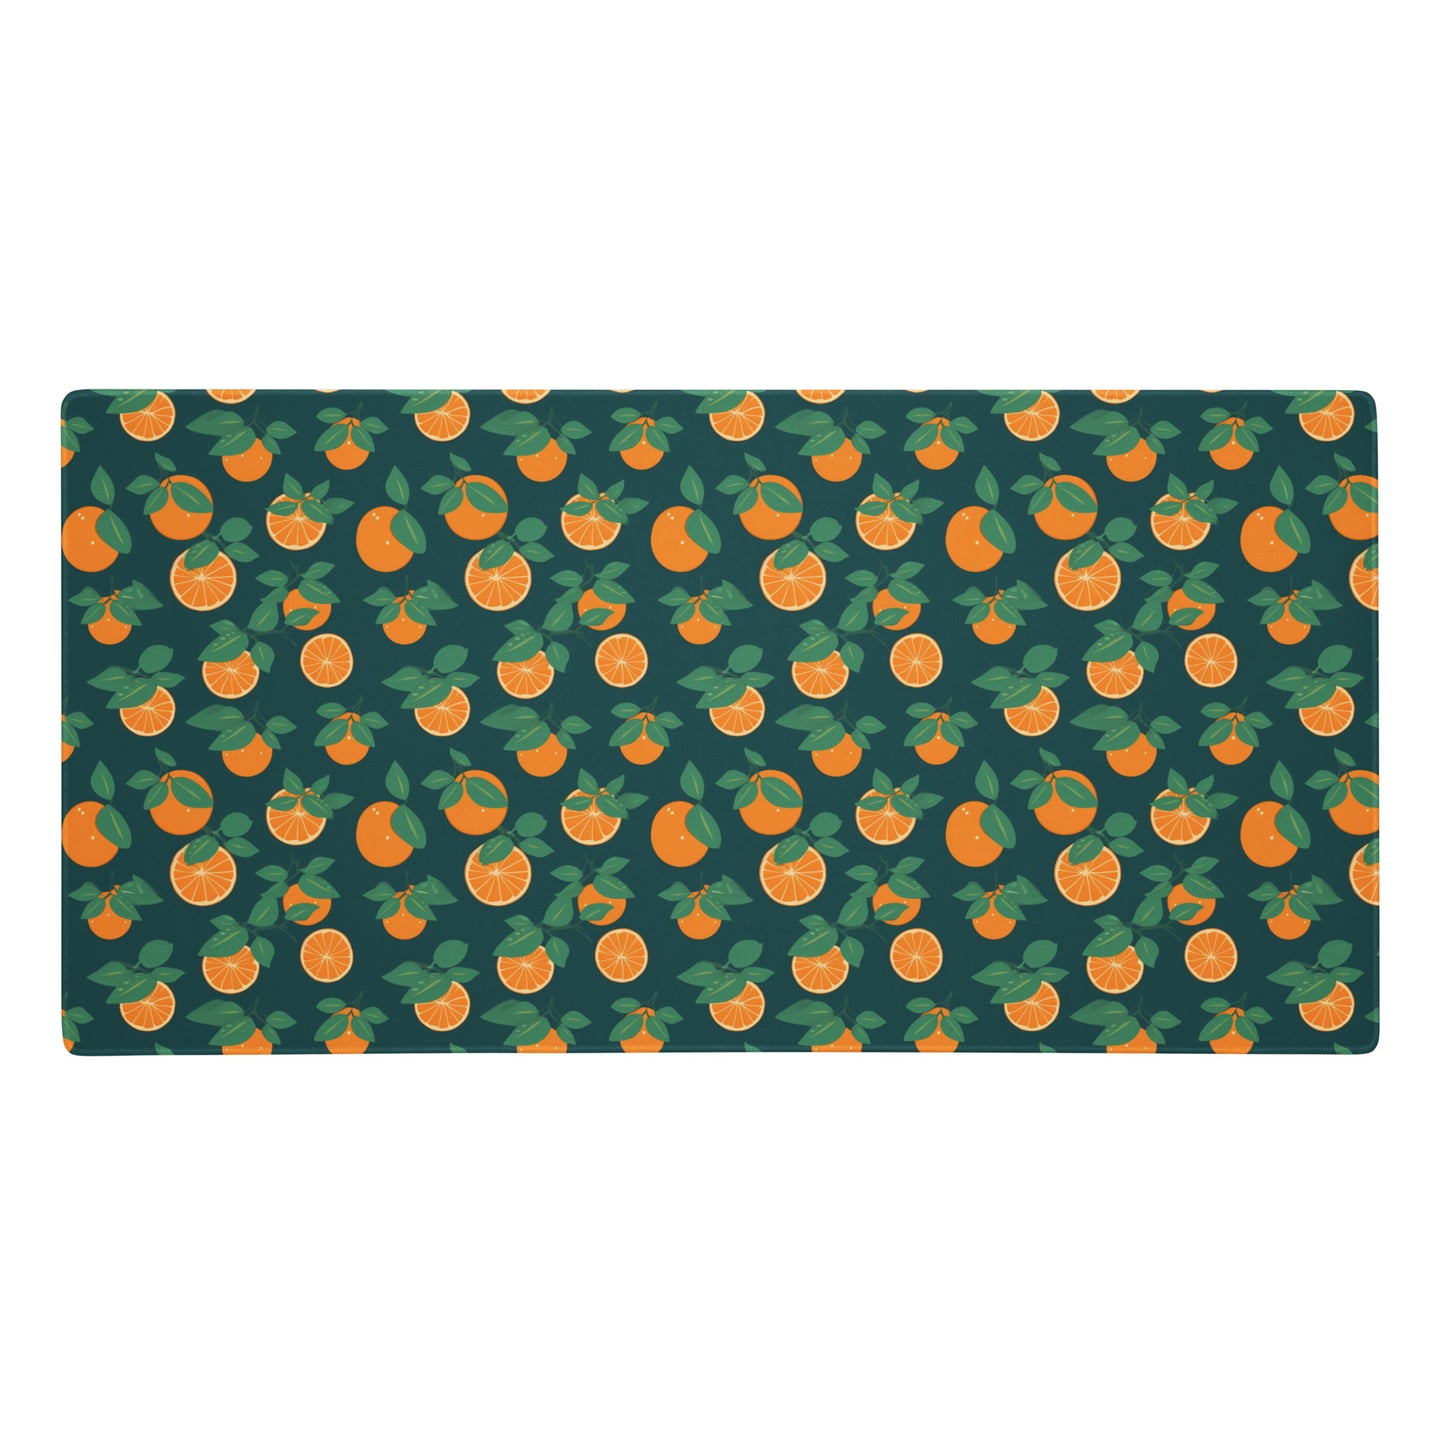 A 36" x 18" desk pad with oranges all over it. Orange and Blue in color.